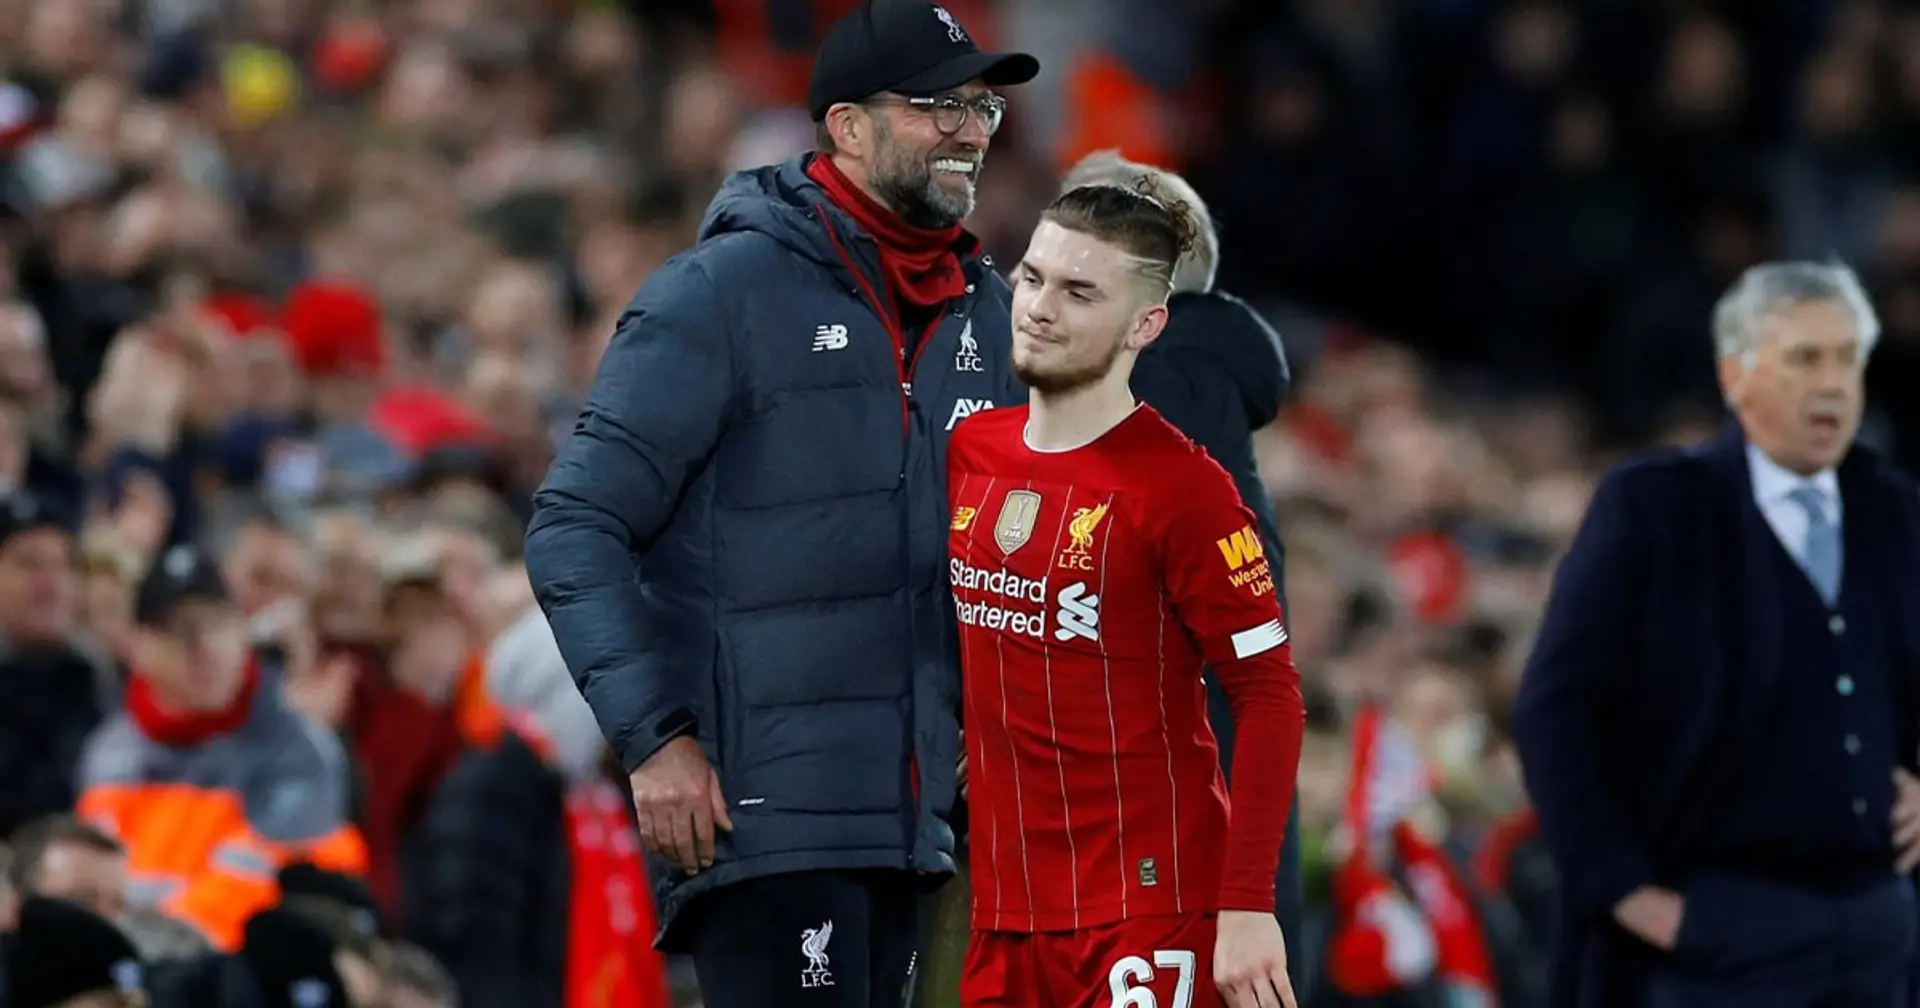 'We want to create transfers internally': Klopp names 8 Reds starlets close to first team